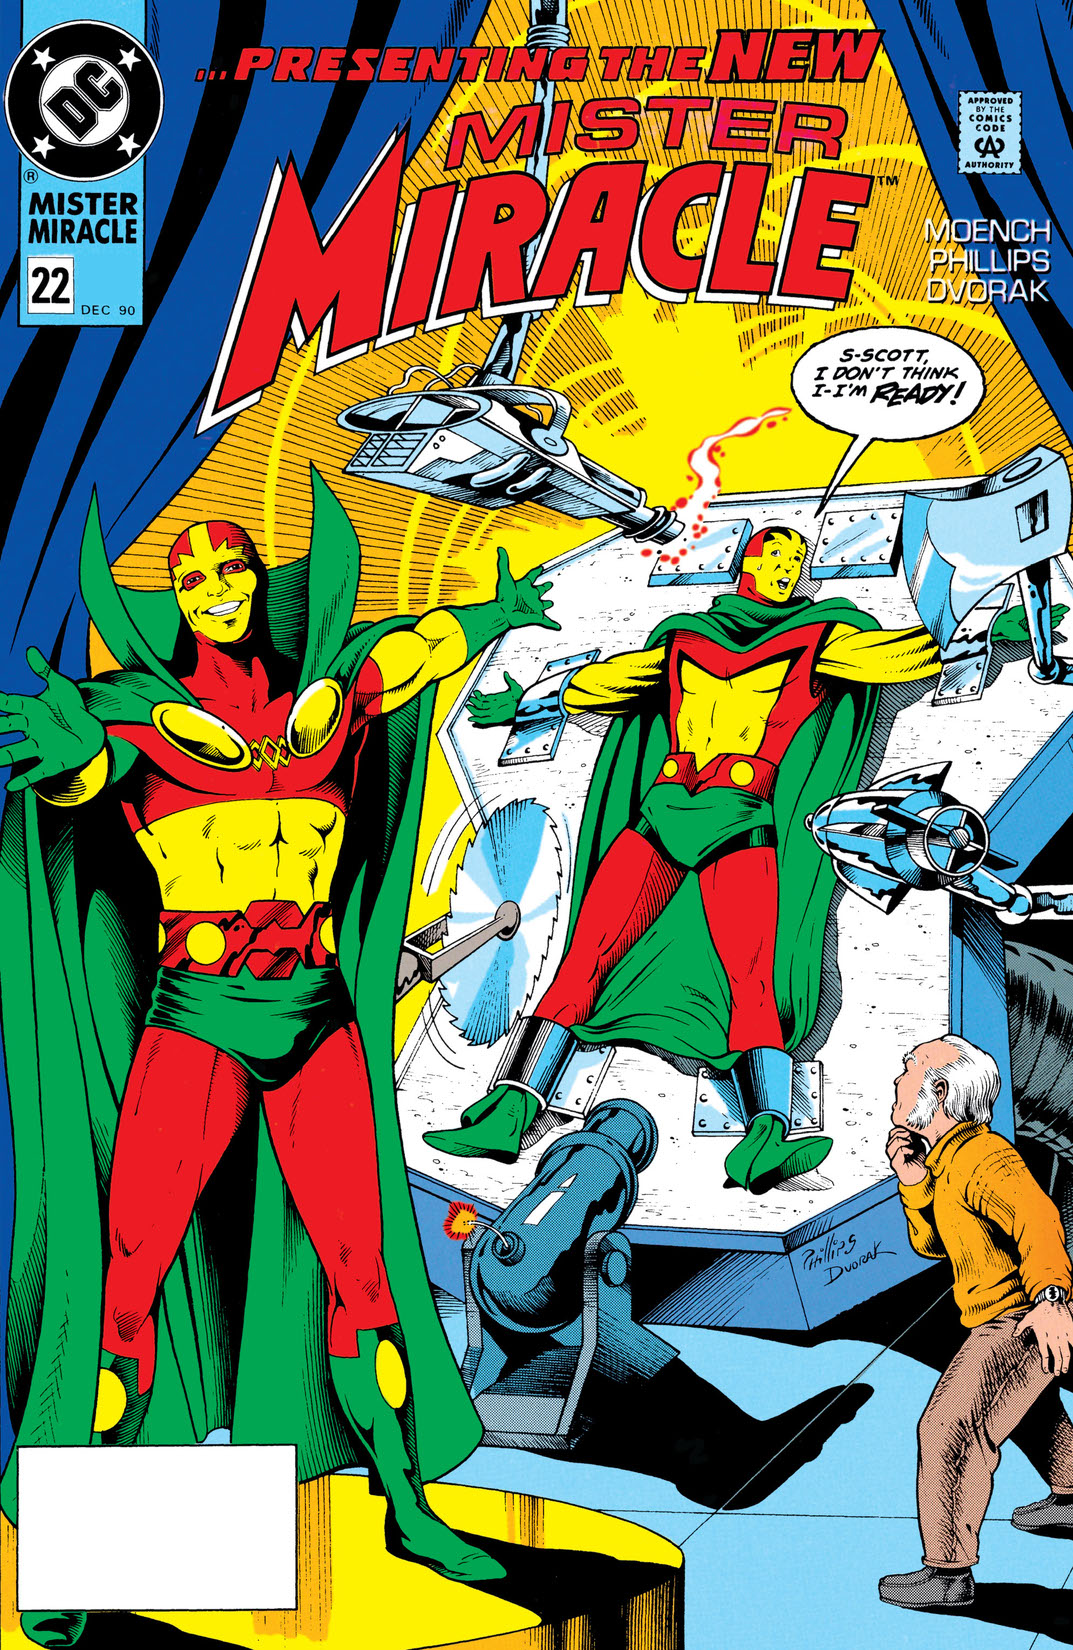 Mister Miracle (1988-) #22 preview images